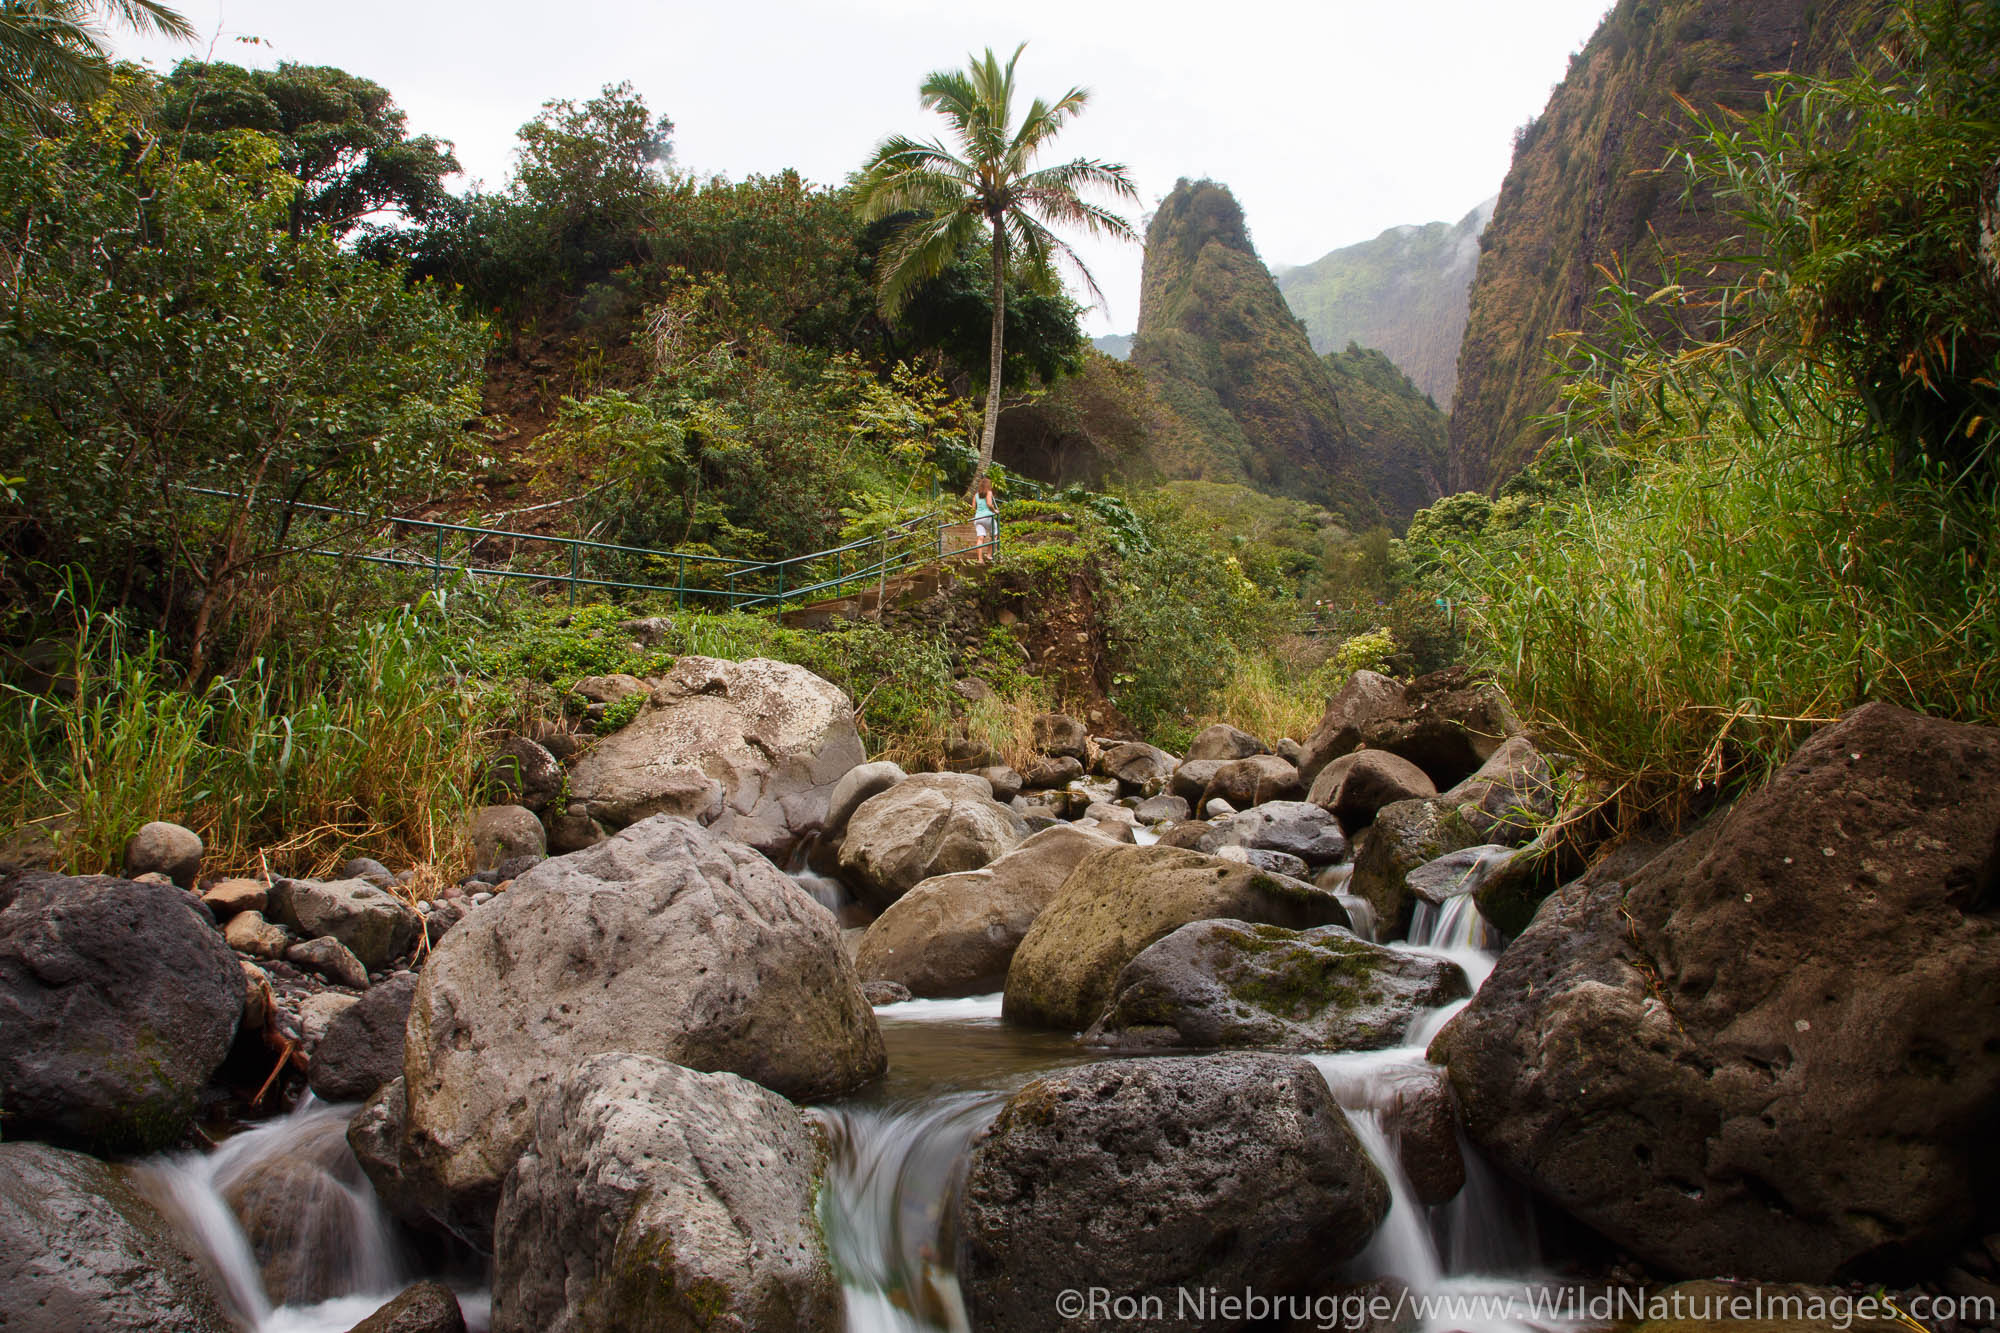 Hker at the Iao Needle and Iao Valley State Park, Maui, Hawaii.  (model released)